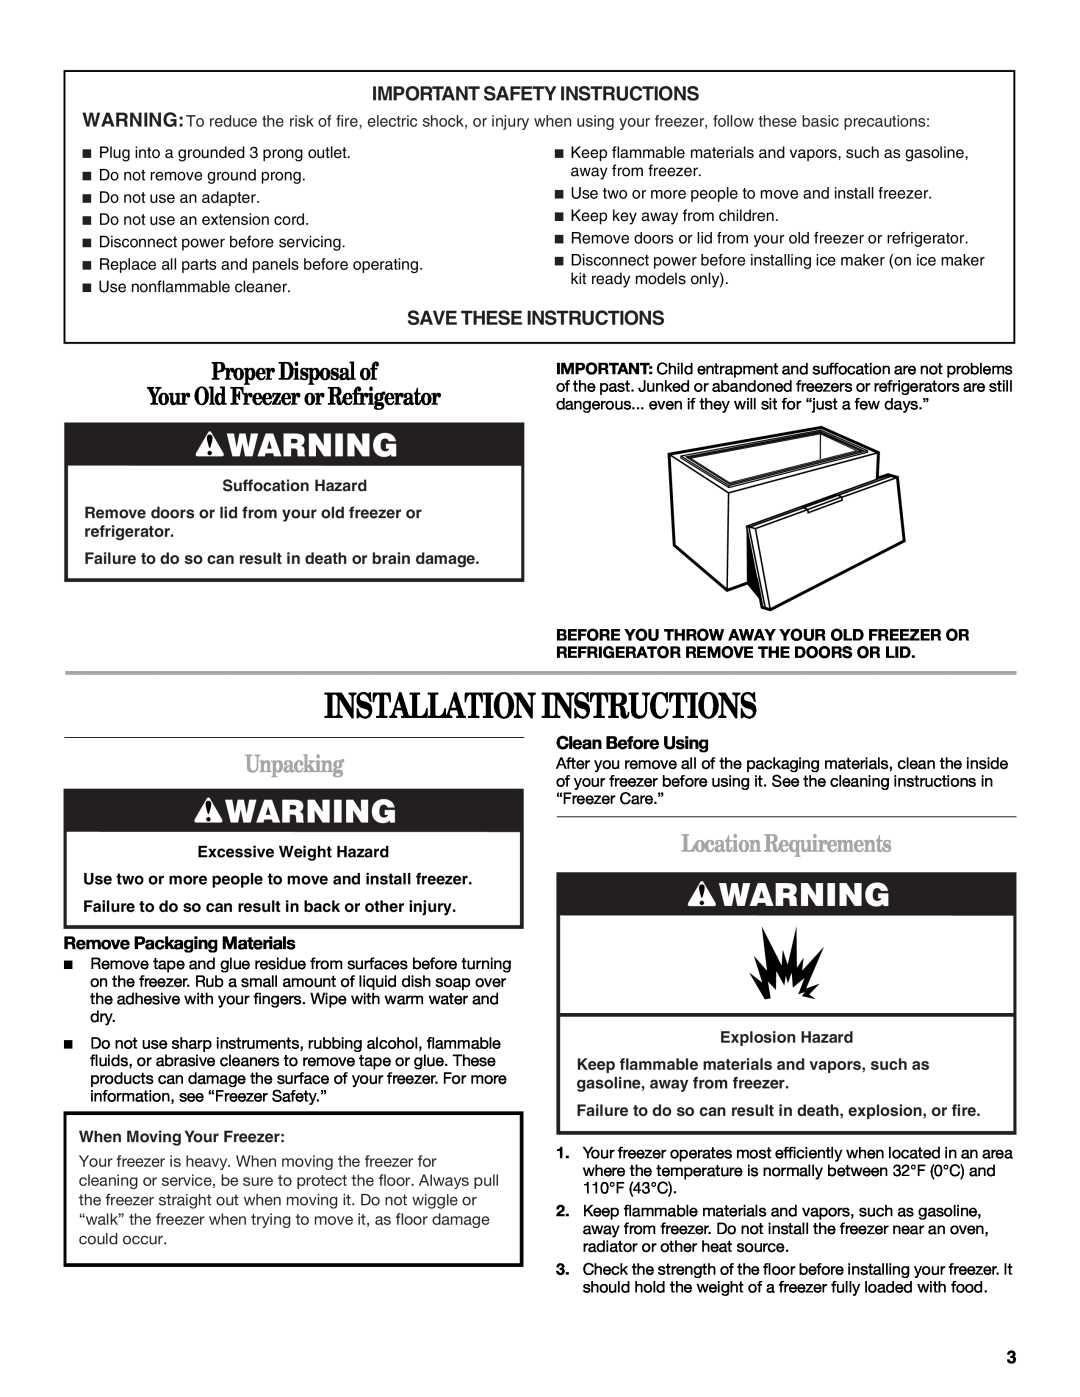 Whirlpool EH070CFXCO manual Installation Instructions, Proper Disposal of Your Old Freezer or Refrigerator, Unpacking 